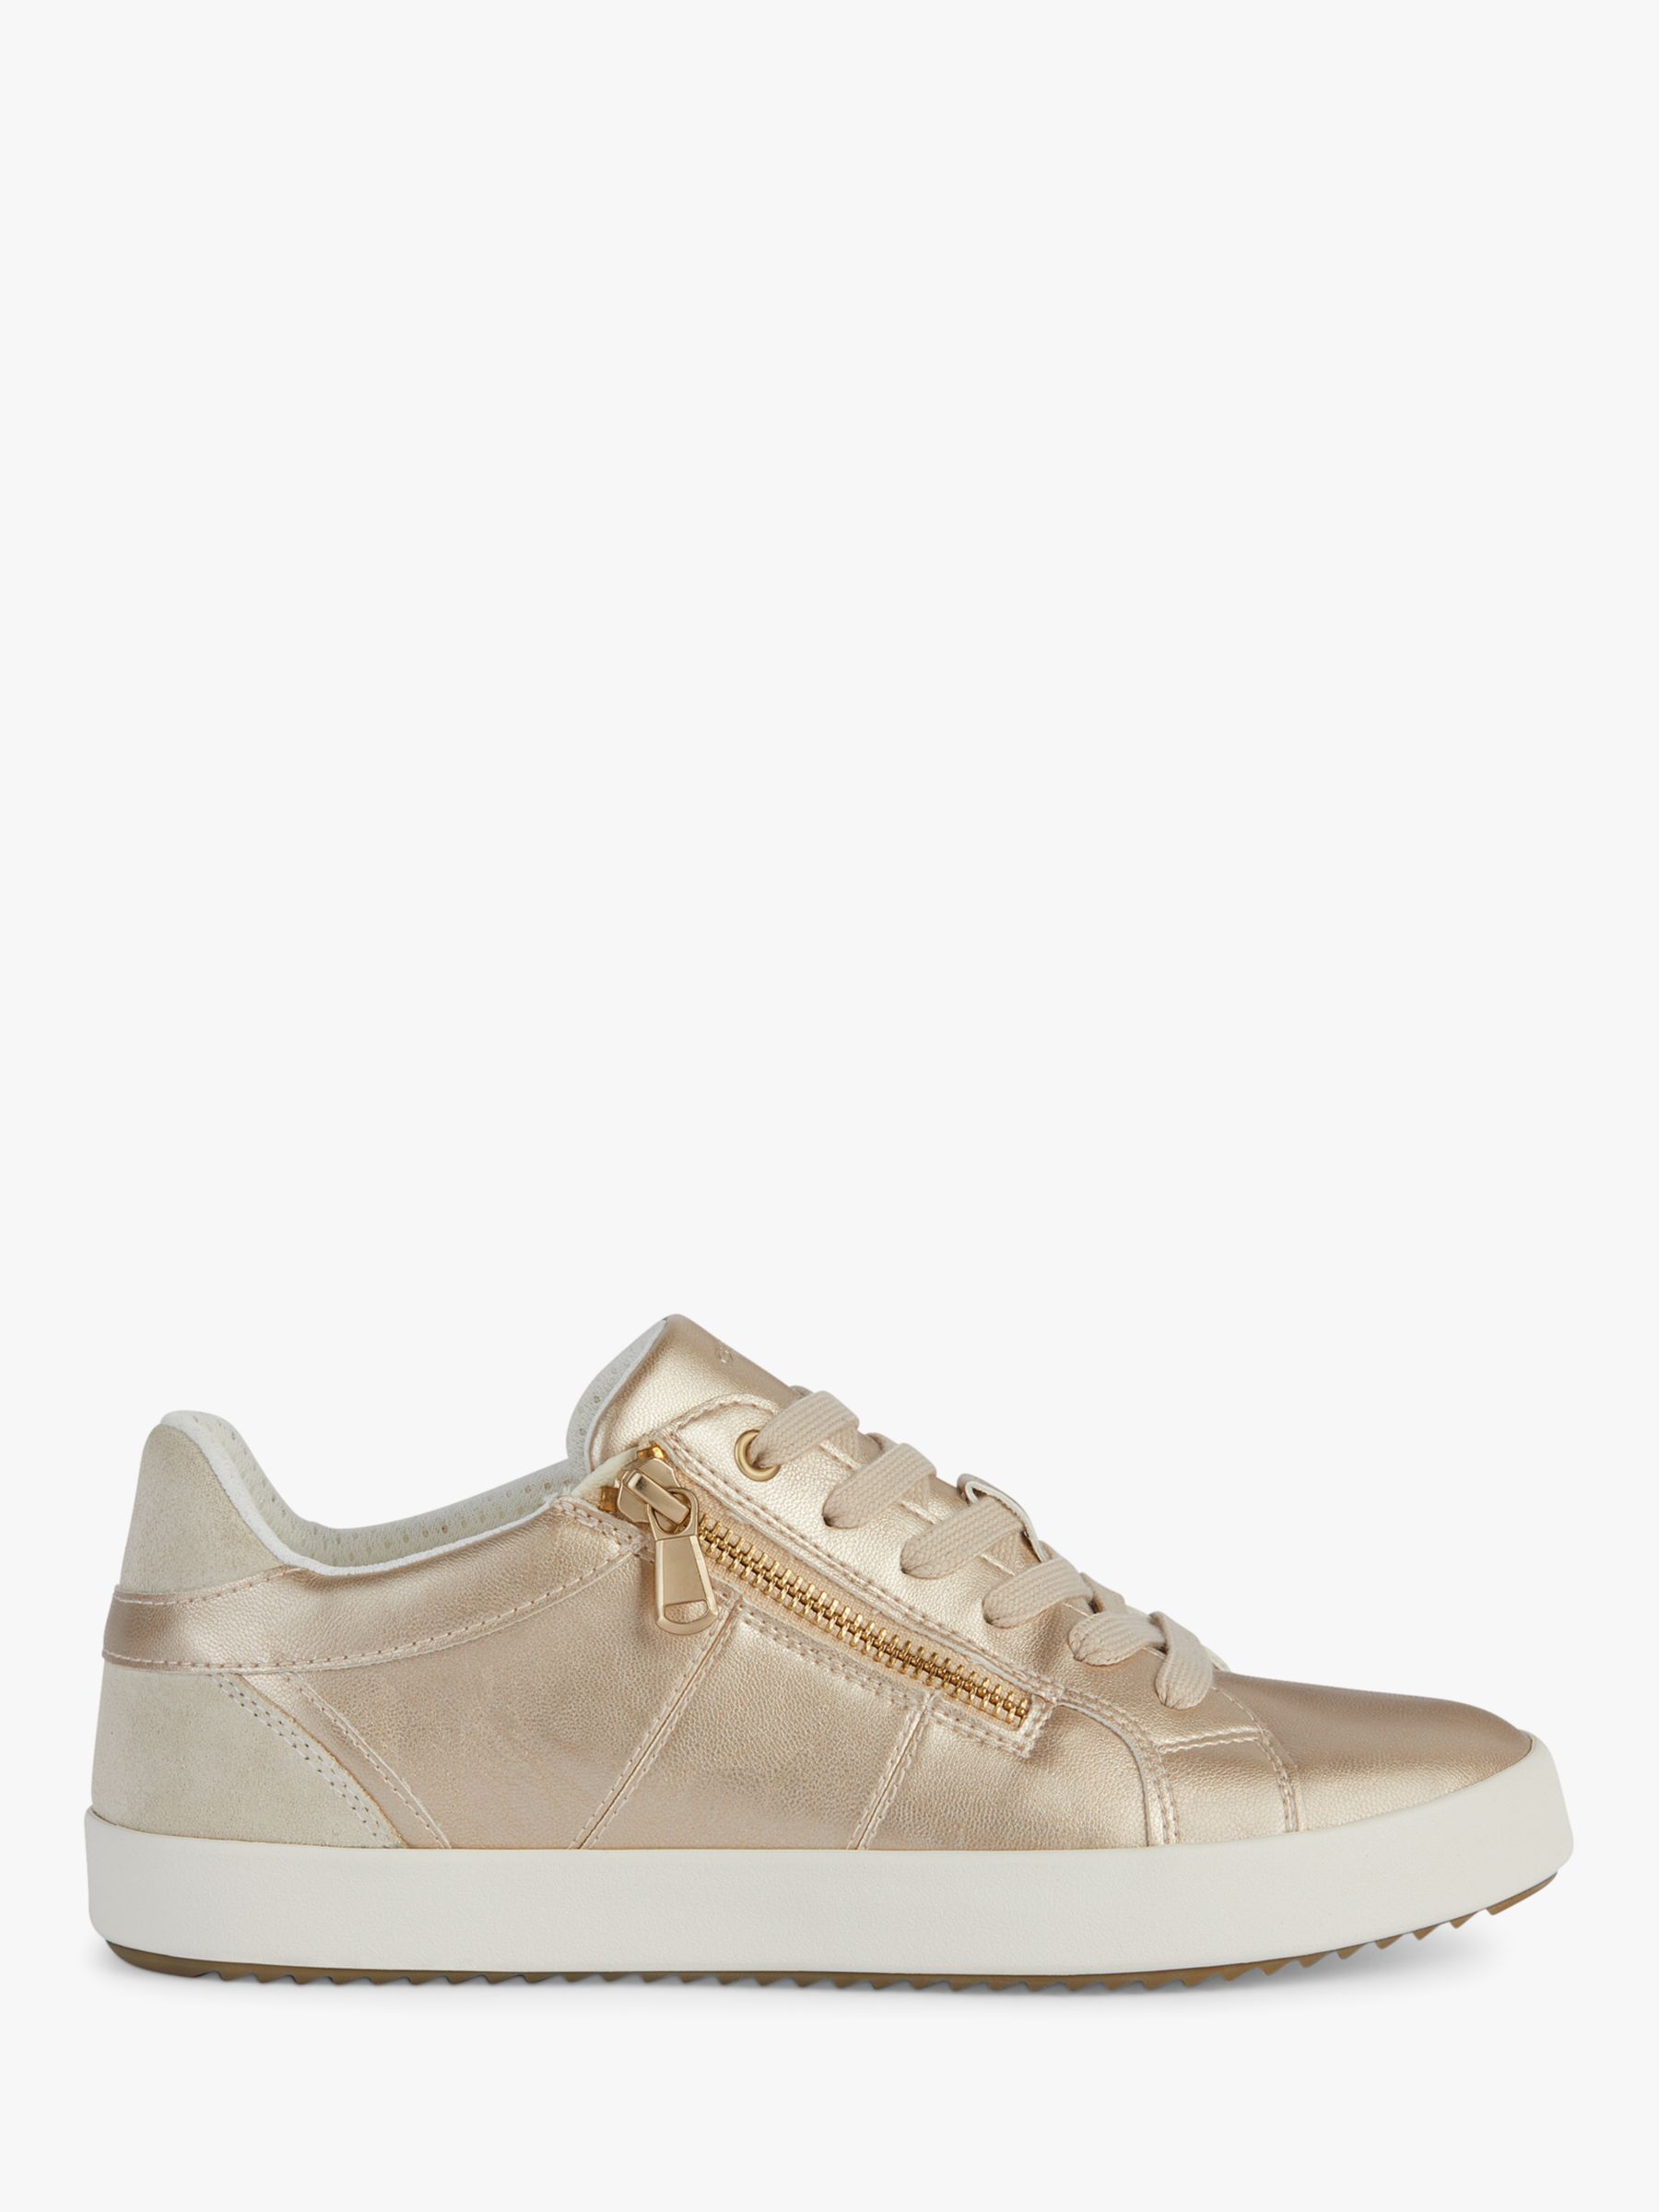 Geox Blomiee Lightweight Zip Detail Trainers, Gold/Sand at John Lewis ...